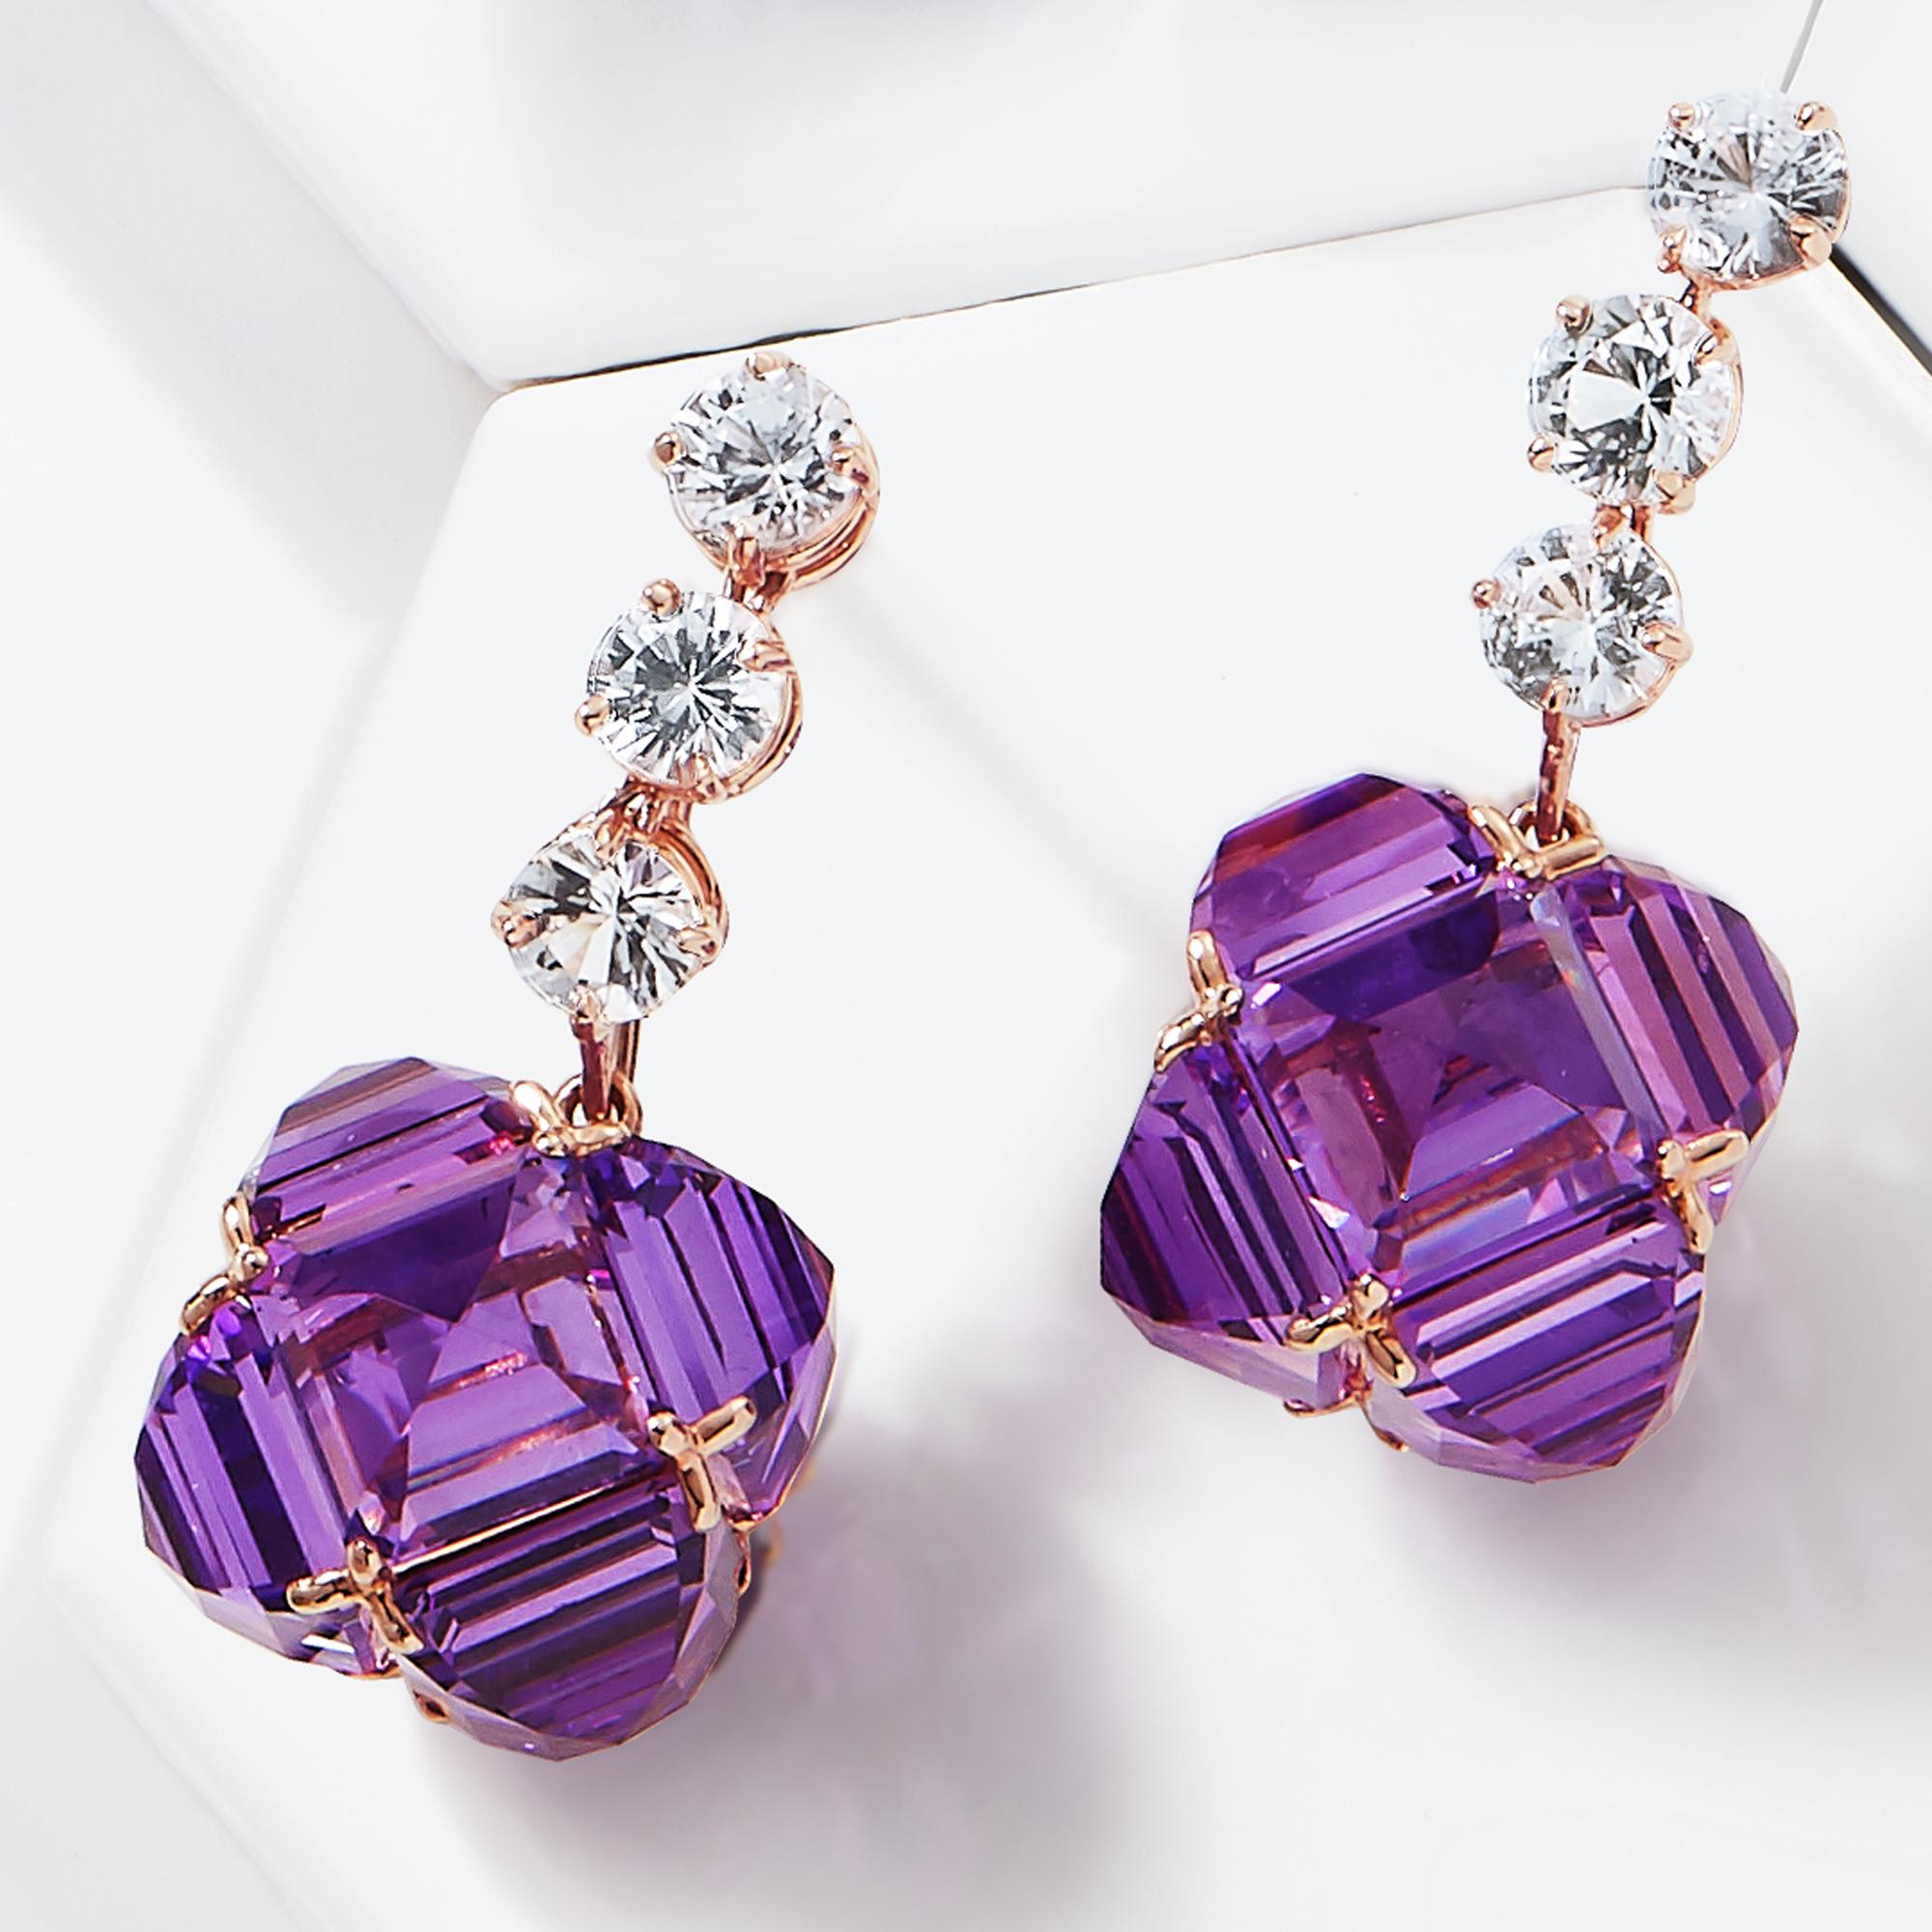 White sapphire earrings set in rose gold paired with reverse-set emerald-cut amethyst earring pendants from the Very PC® collection. 

Staying true to Paolo Costagli’s appreciation for modern and clean geometries, the Very PC® collection embodies